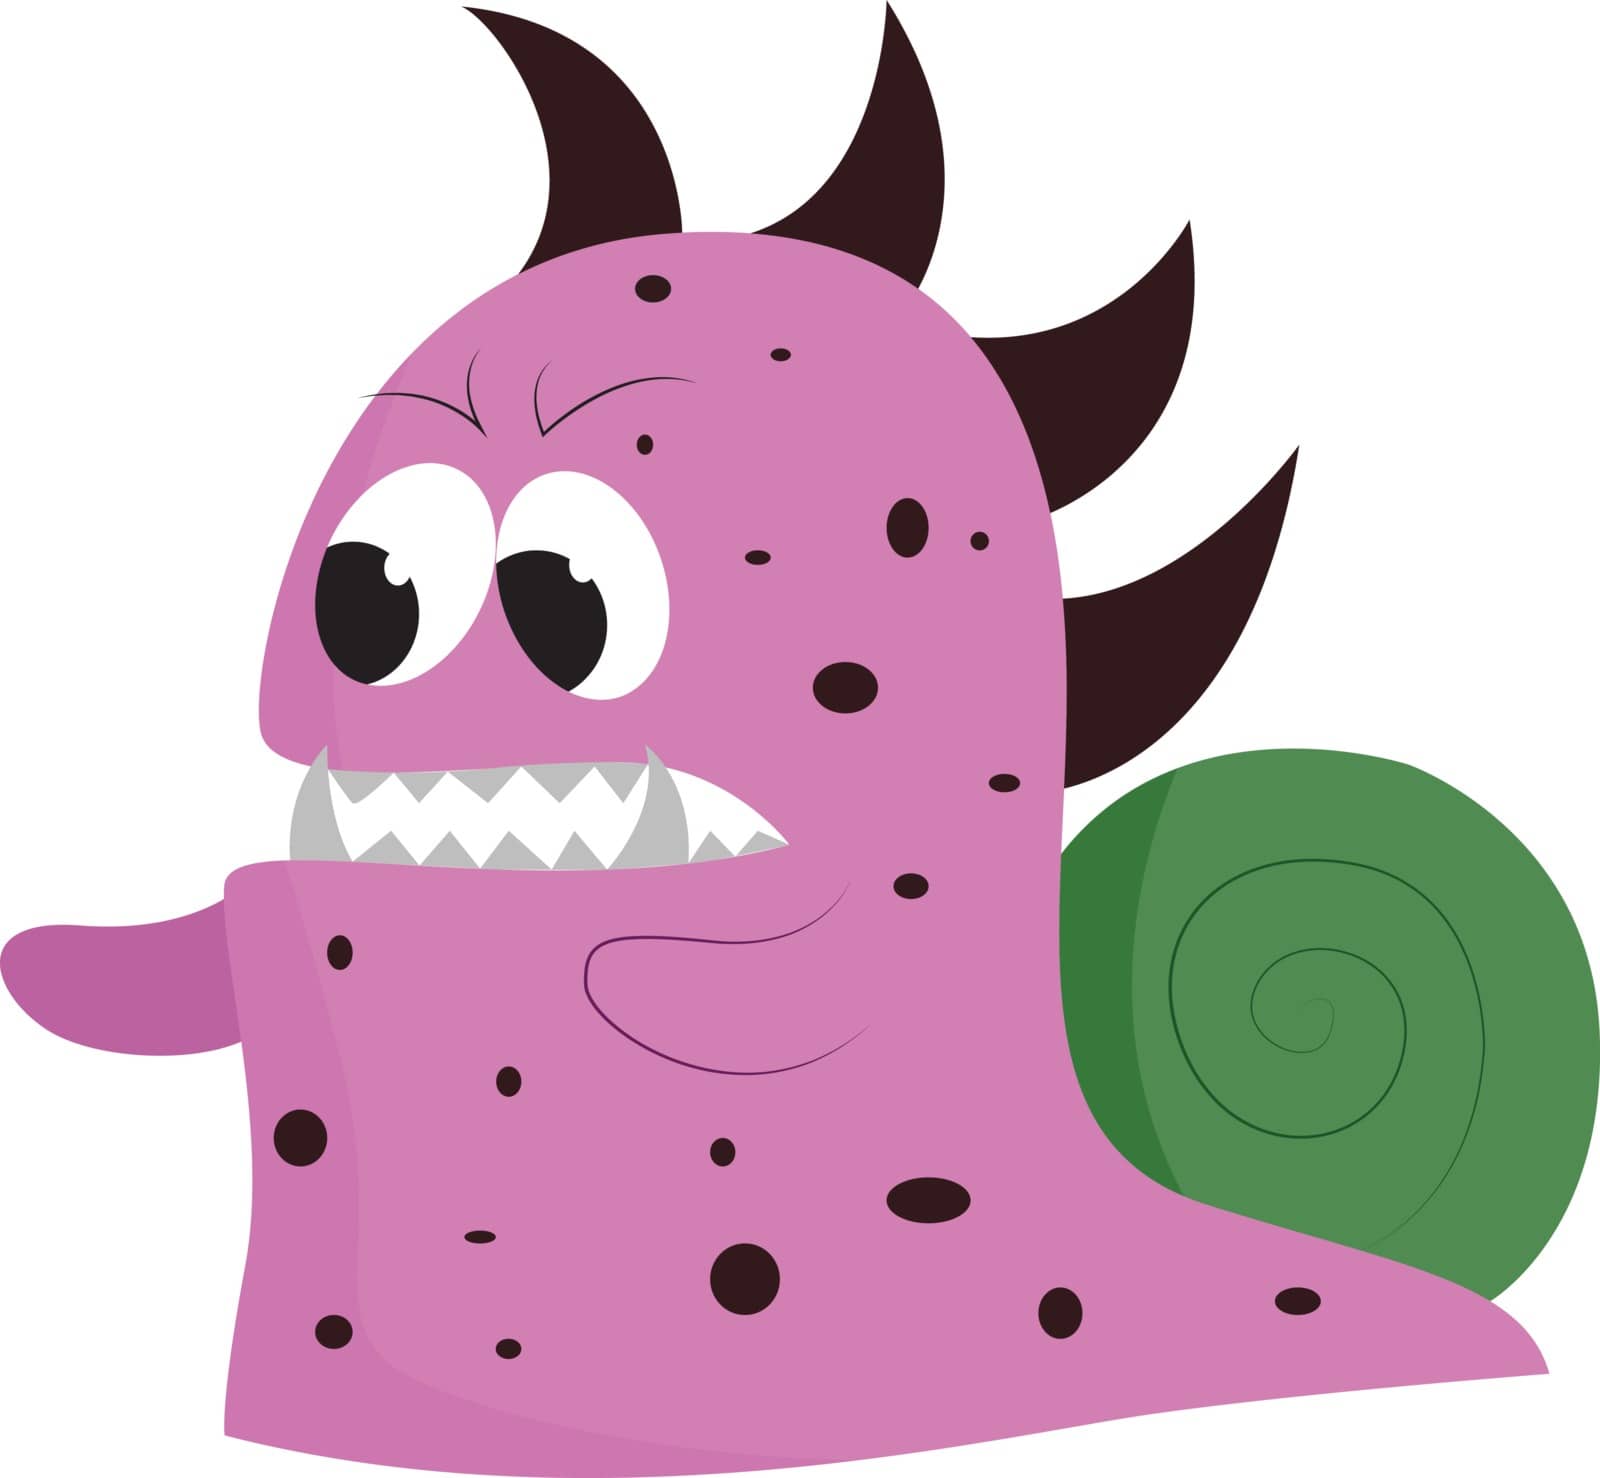 An angry purple snail like monster with sharp razor teeth and dorsal fins, vector, color drawing or illustration.